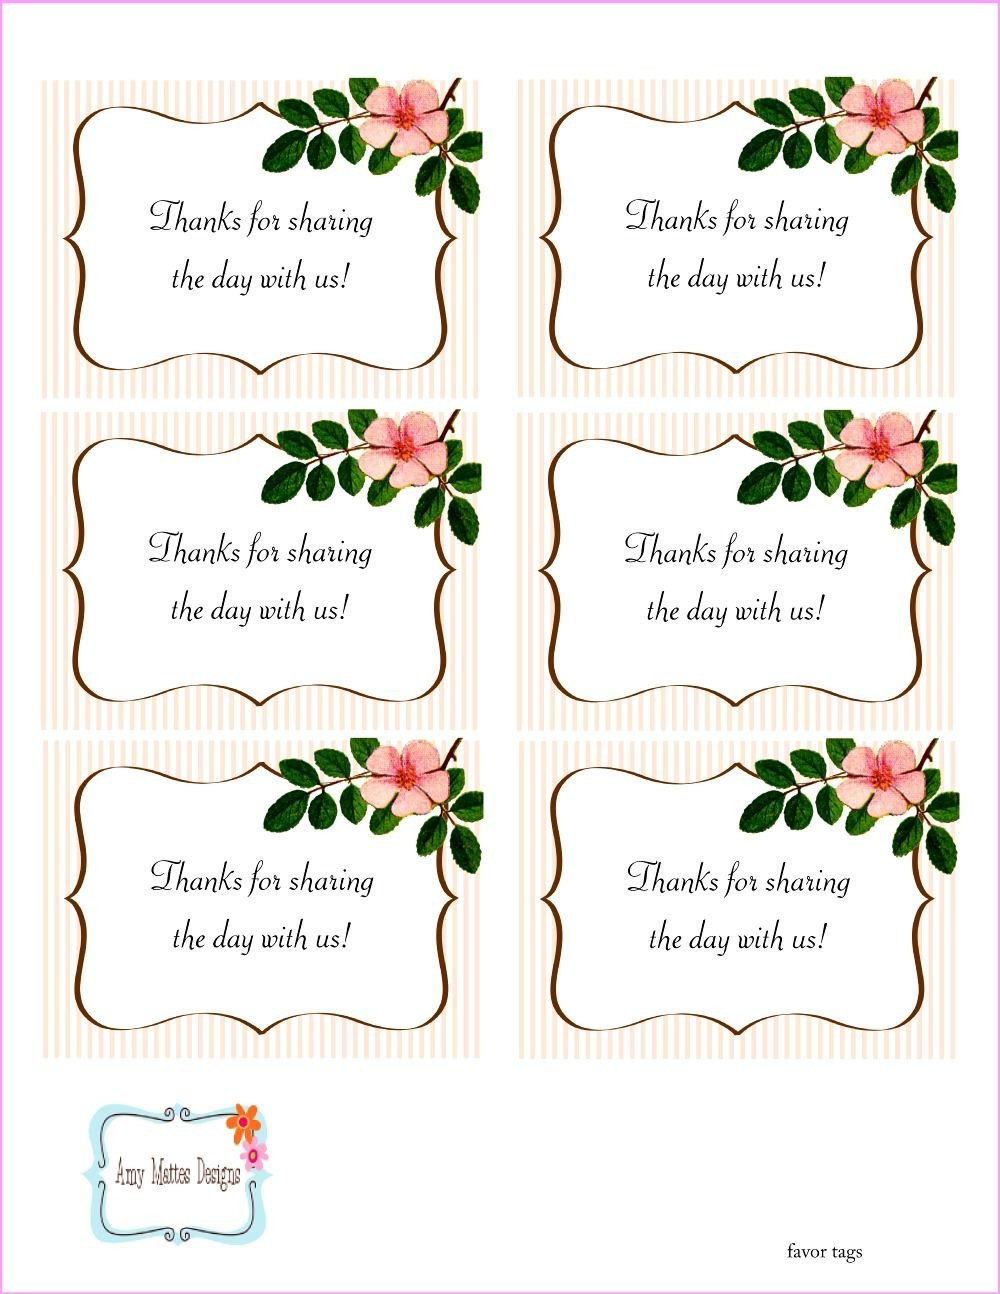 The Beautiful Wedding Favor Tags as our identity free